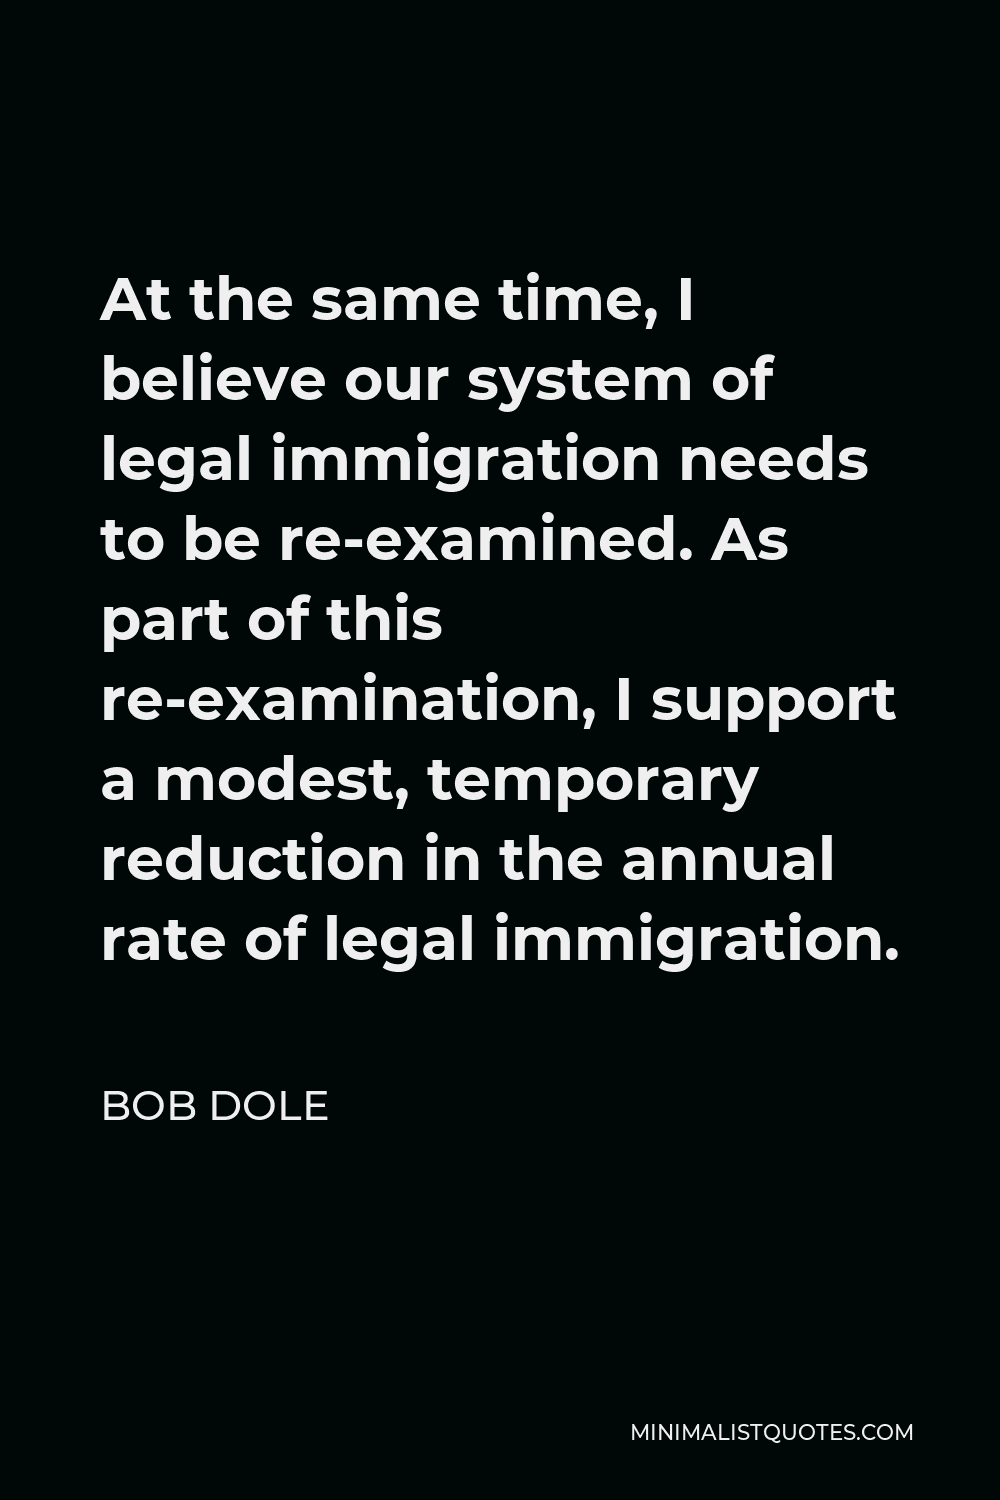 Bob Dole Quote - At the same time, I believe our system of legal immigration needs to be re-examined. As part of this re-examination, I support a modest, temporary reduction in the annual rate of legal immigration.